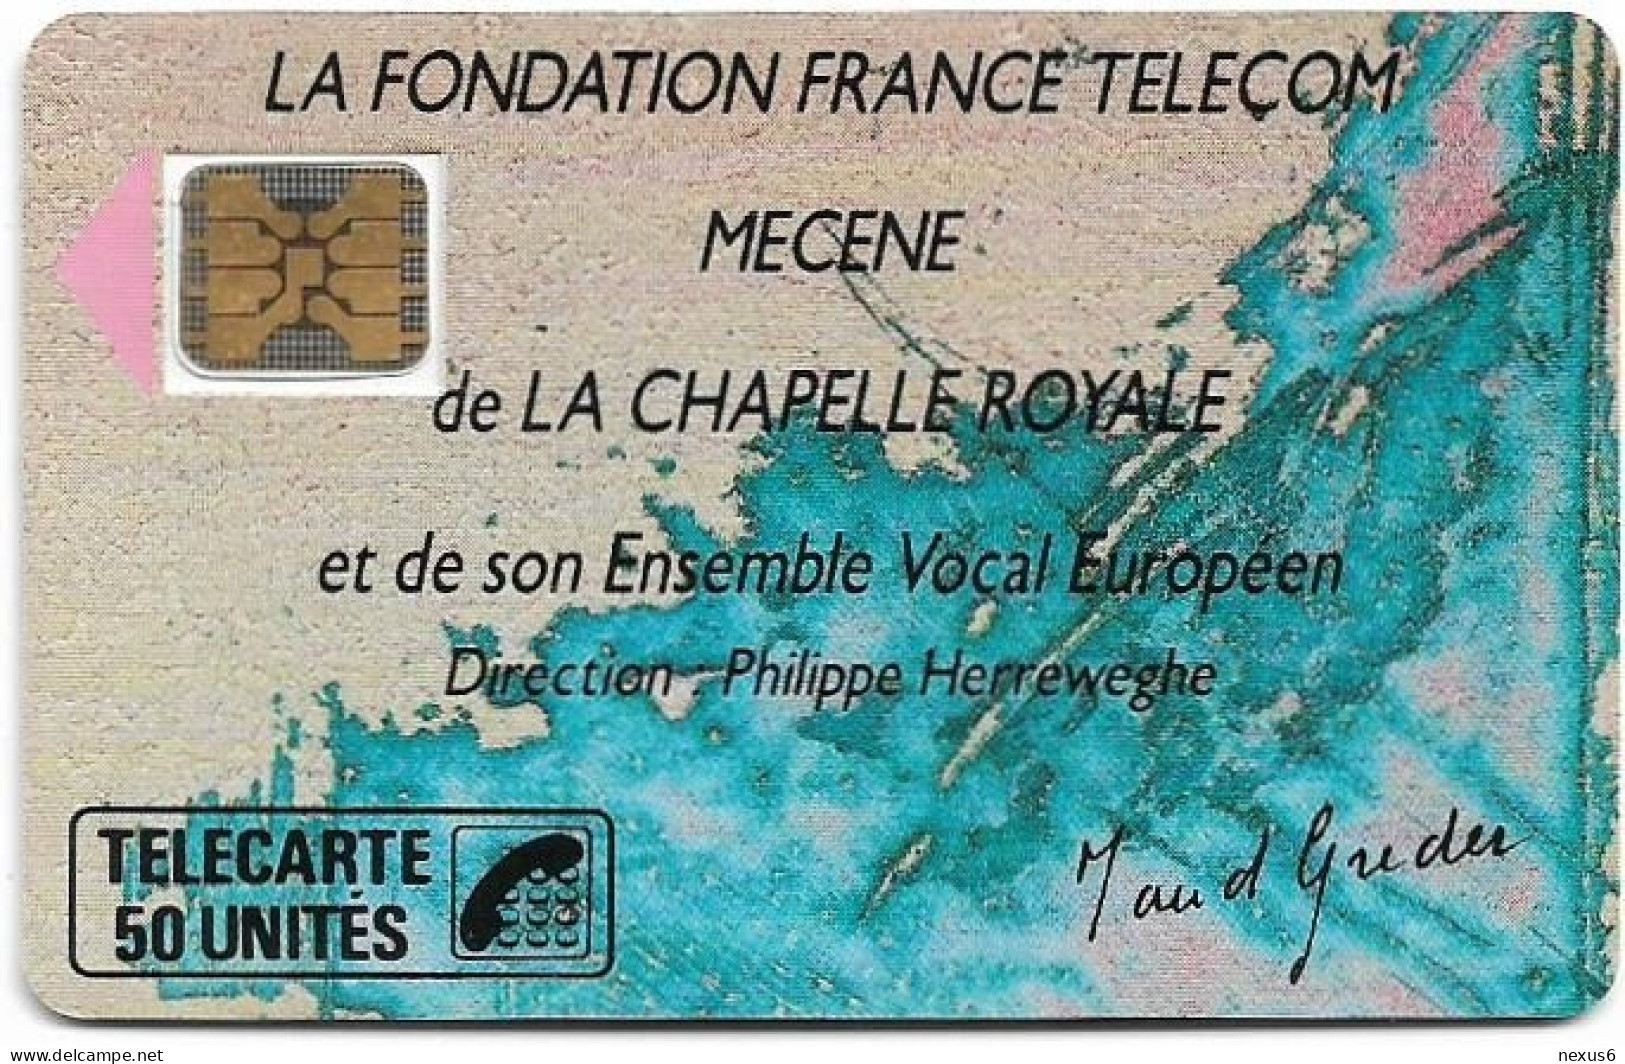 France - 0077A - Chapelle Royale 3 (texte Fin), SC5 GB, Cn. 106242, 06.1989, 50Units, 70.000ex, Used - 1989